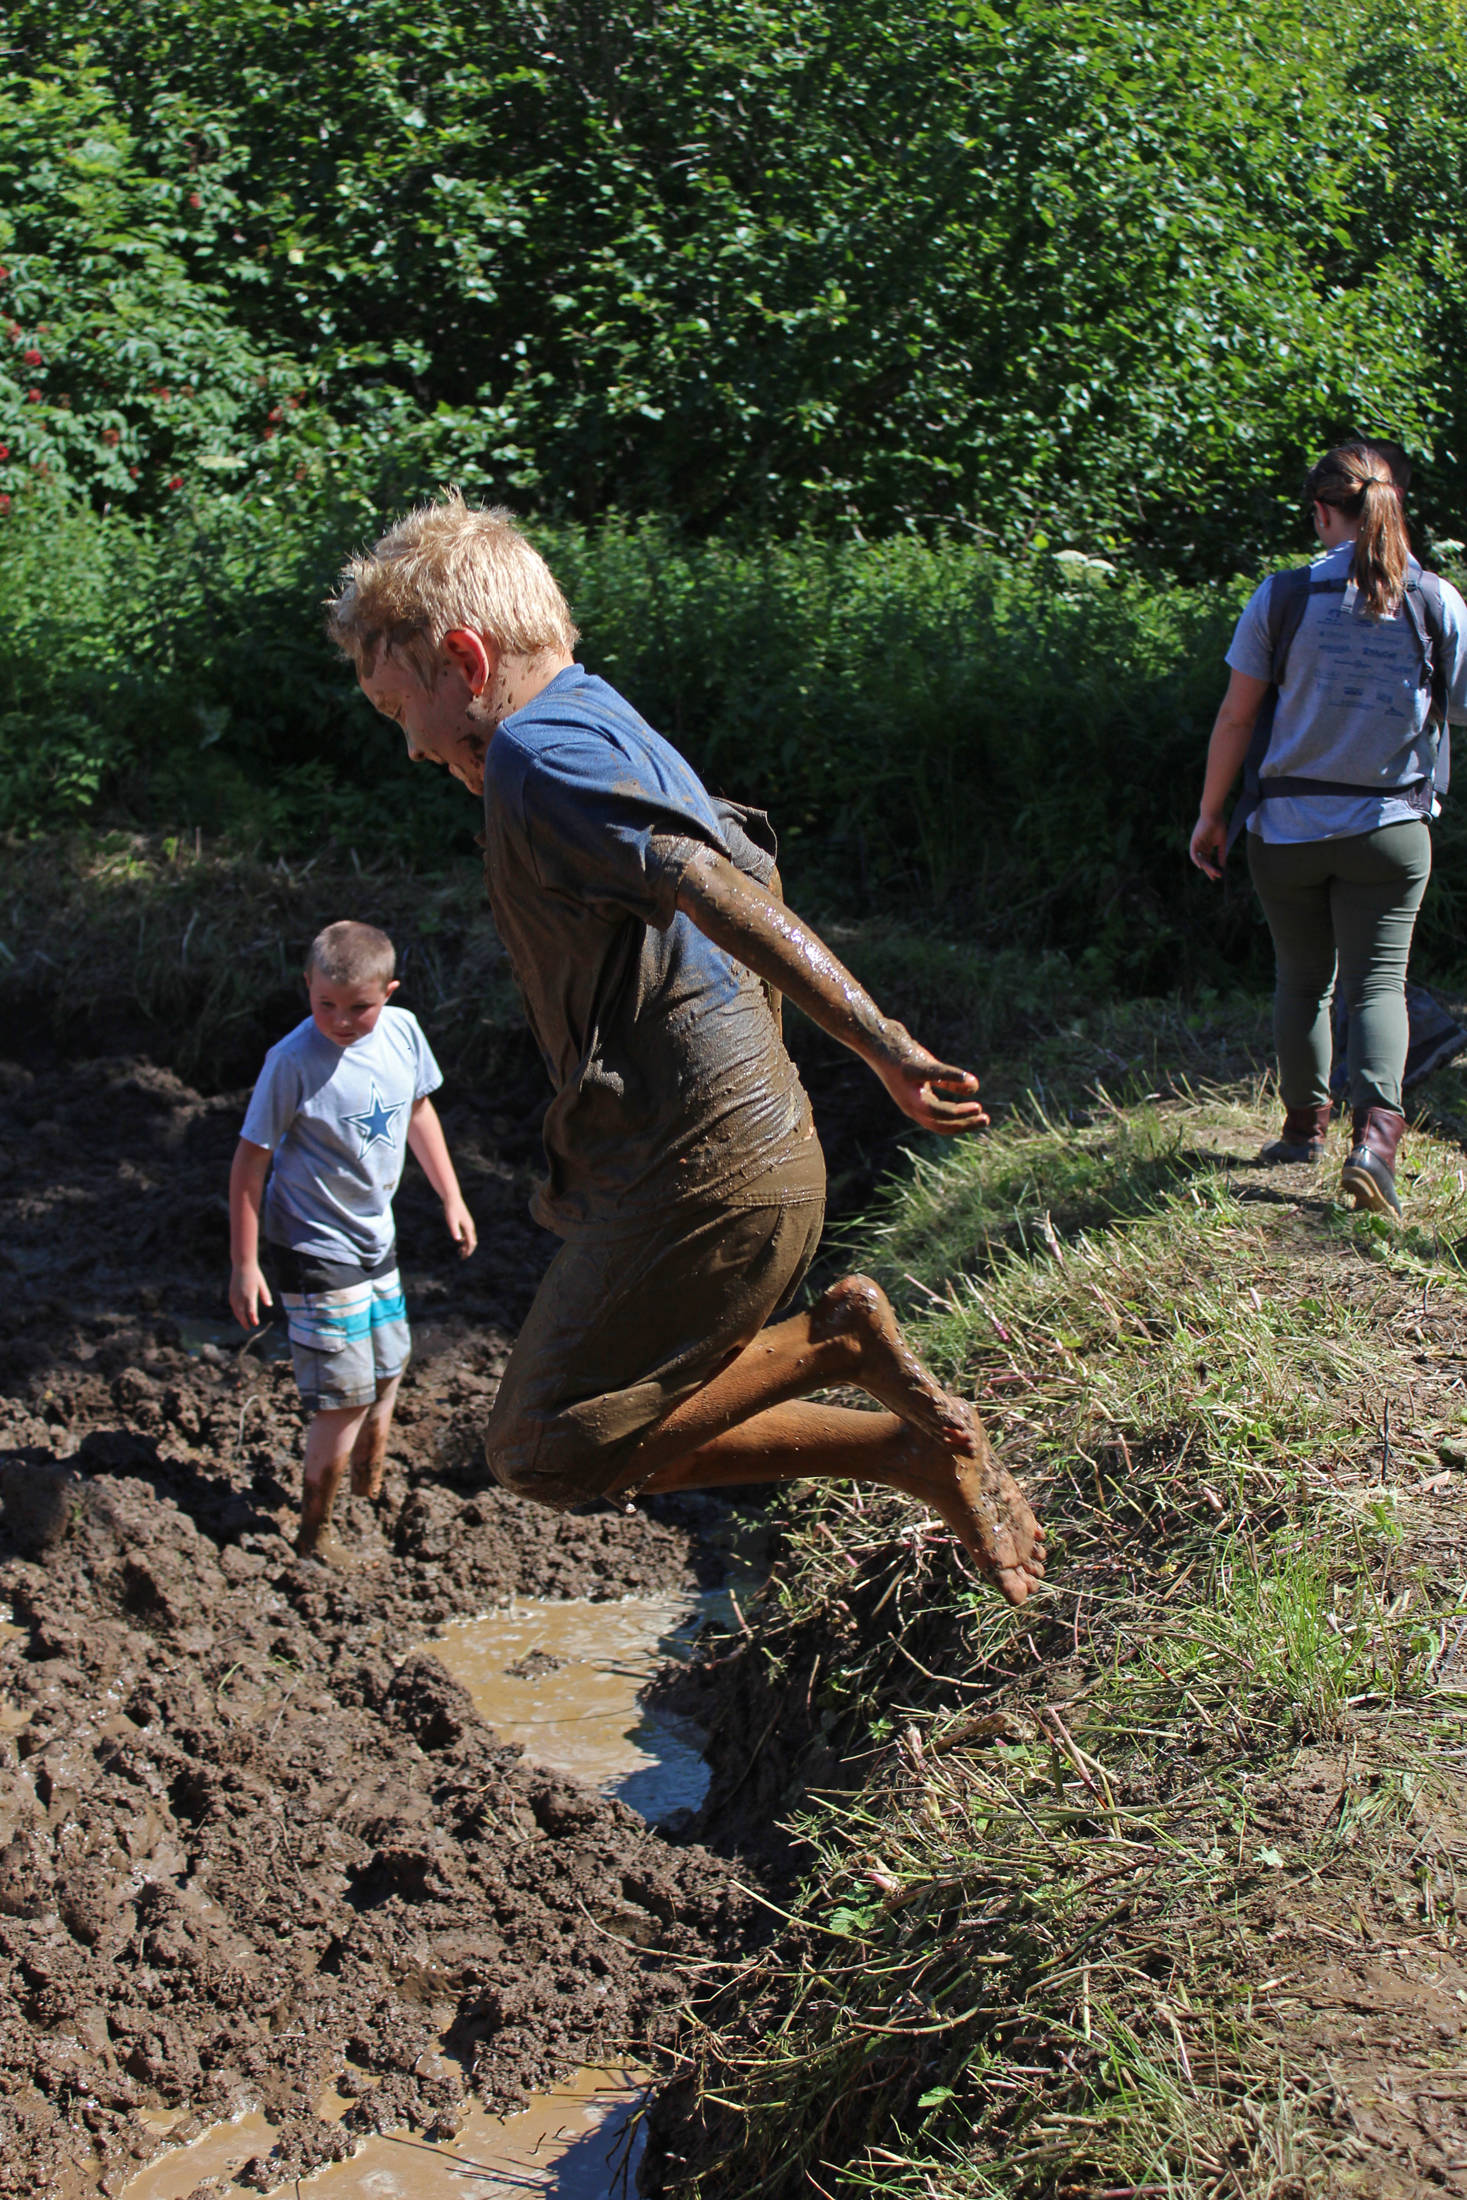 Sailor Clapp, 7, of Texas, leaps into a pit of mud during this year’s Mud Games on Sunday, July 22, 2018 at Cottonwood Horse Park on East End Road in Homer, Alaska. He and his mother are visiting for the summer. (Photo by Megan Pacer/Homer News)